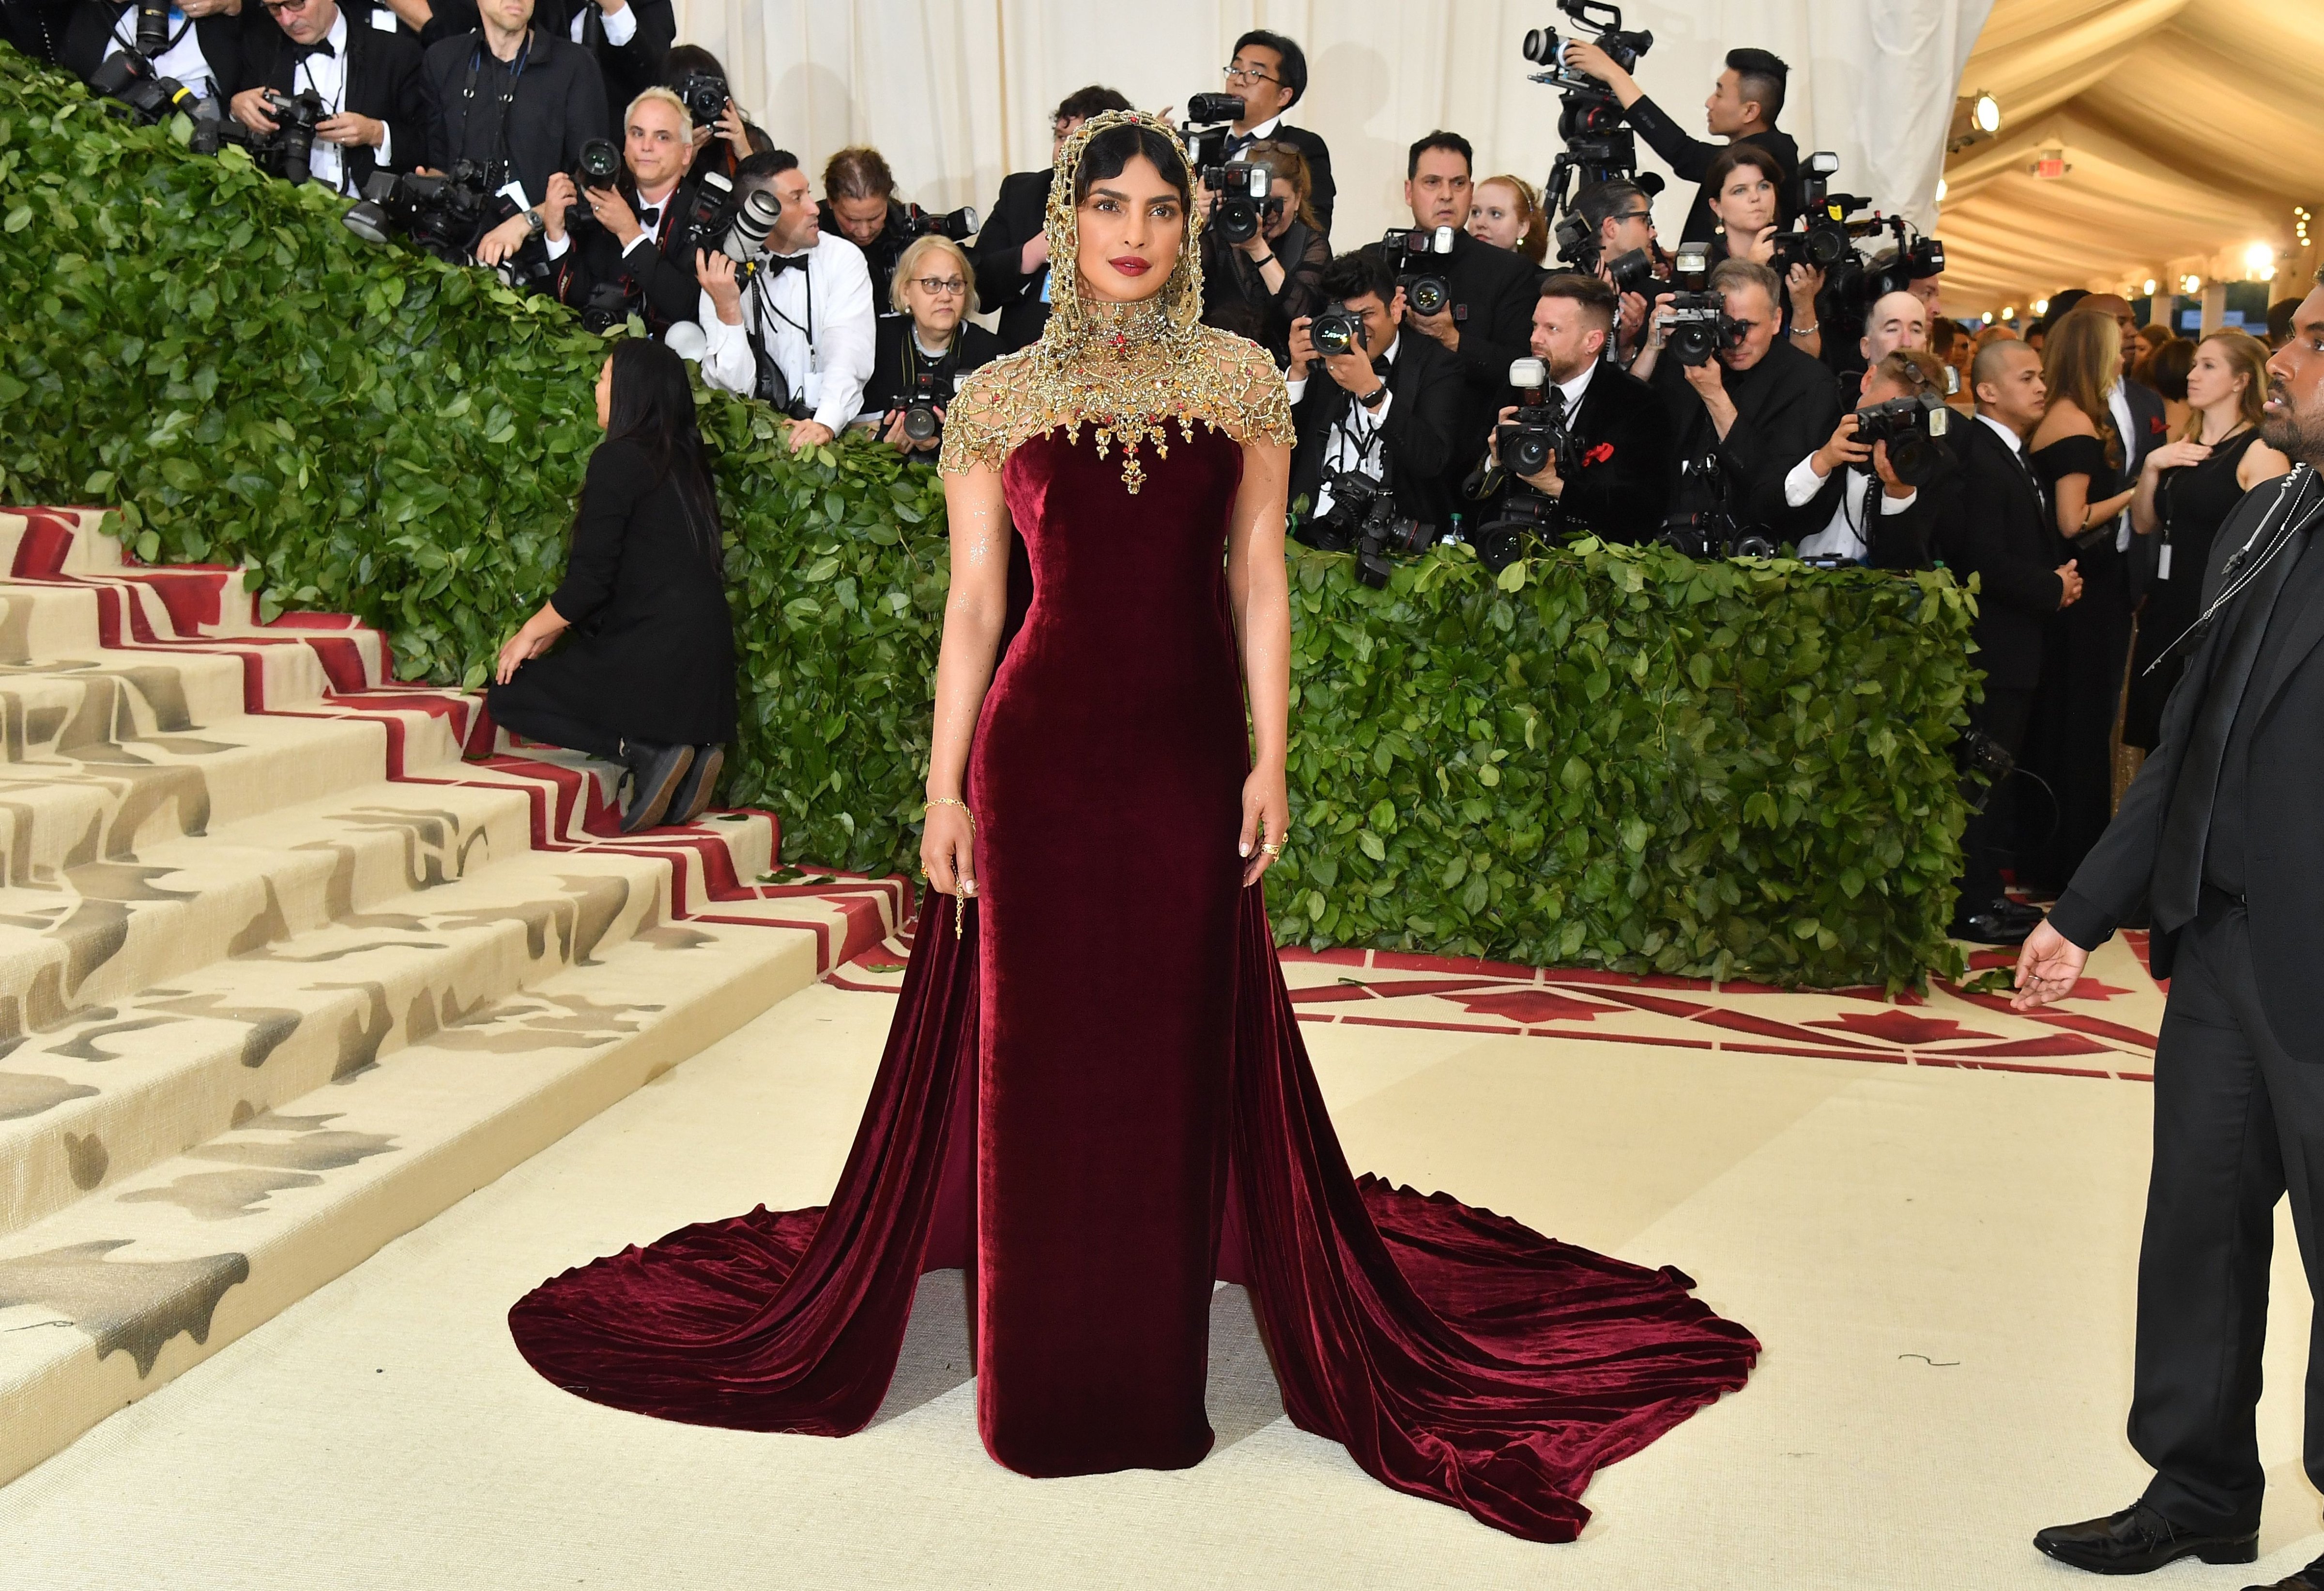 Priyanka Chopra arrives for the 2018 Met Gala on May 7, 2018, at the Metropolitan Museum of Art in New York. (Photo by ANGELA WEISS / AFP) (Photo credit should read ANGELA WEISS/AFP/Getty Images) (ANGELA WEISS—AFP/Getty Images)